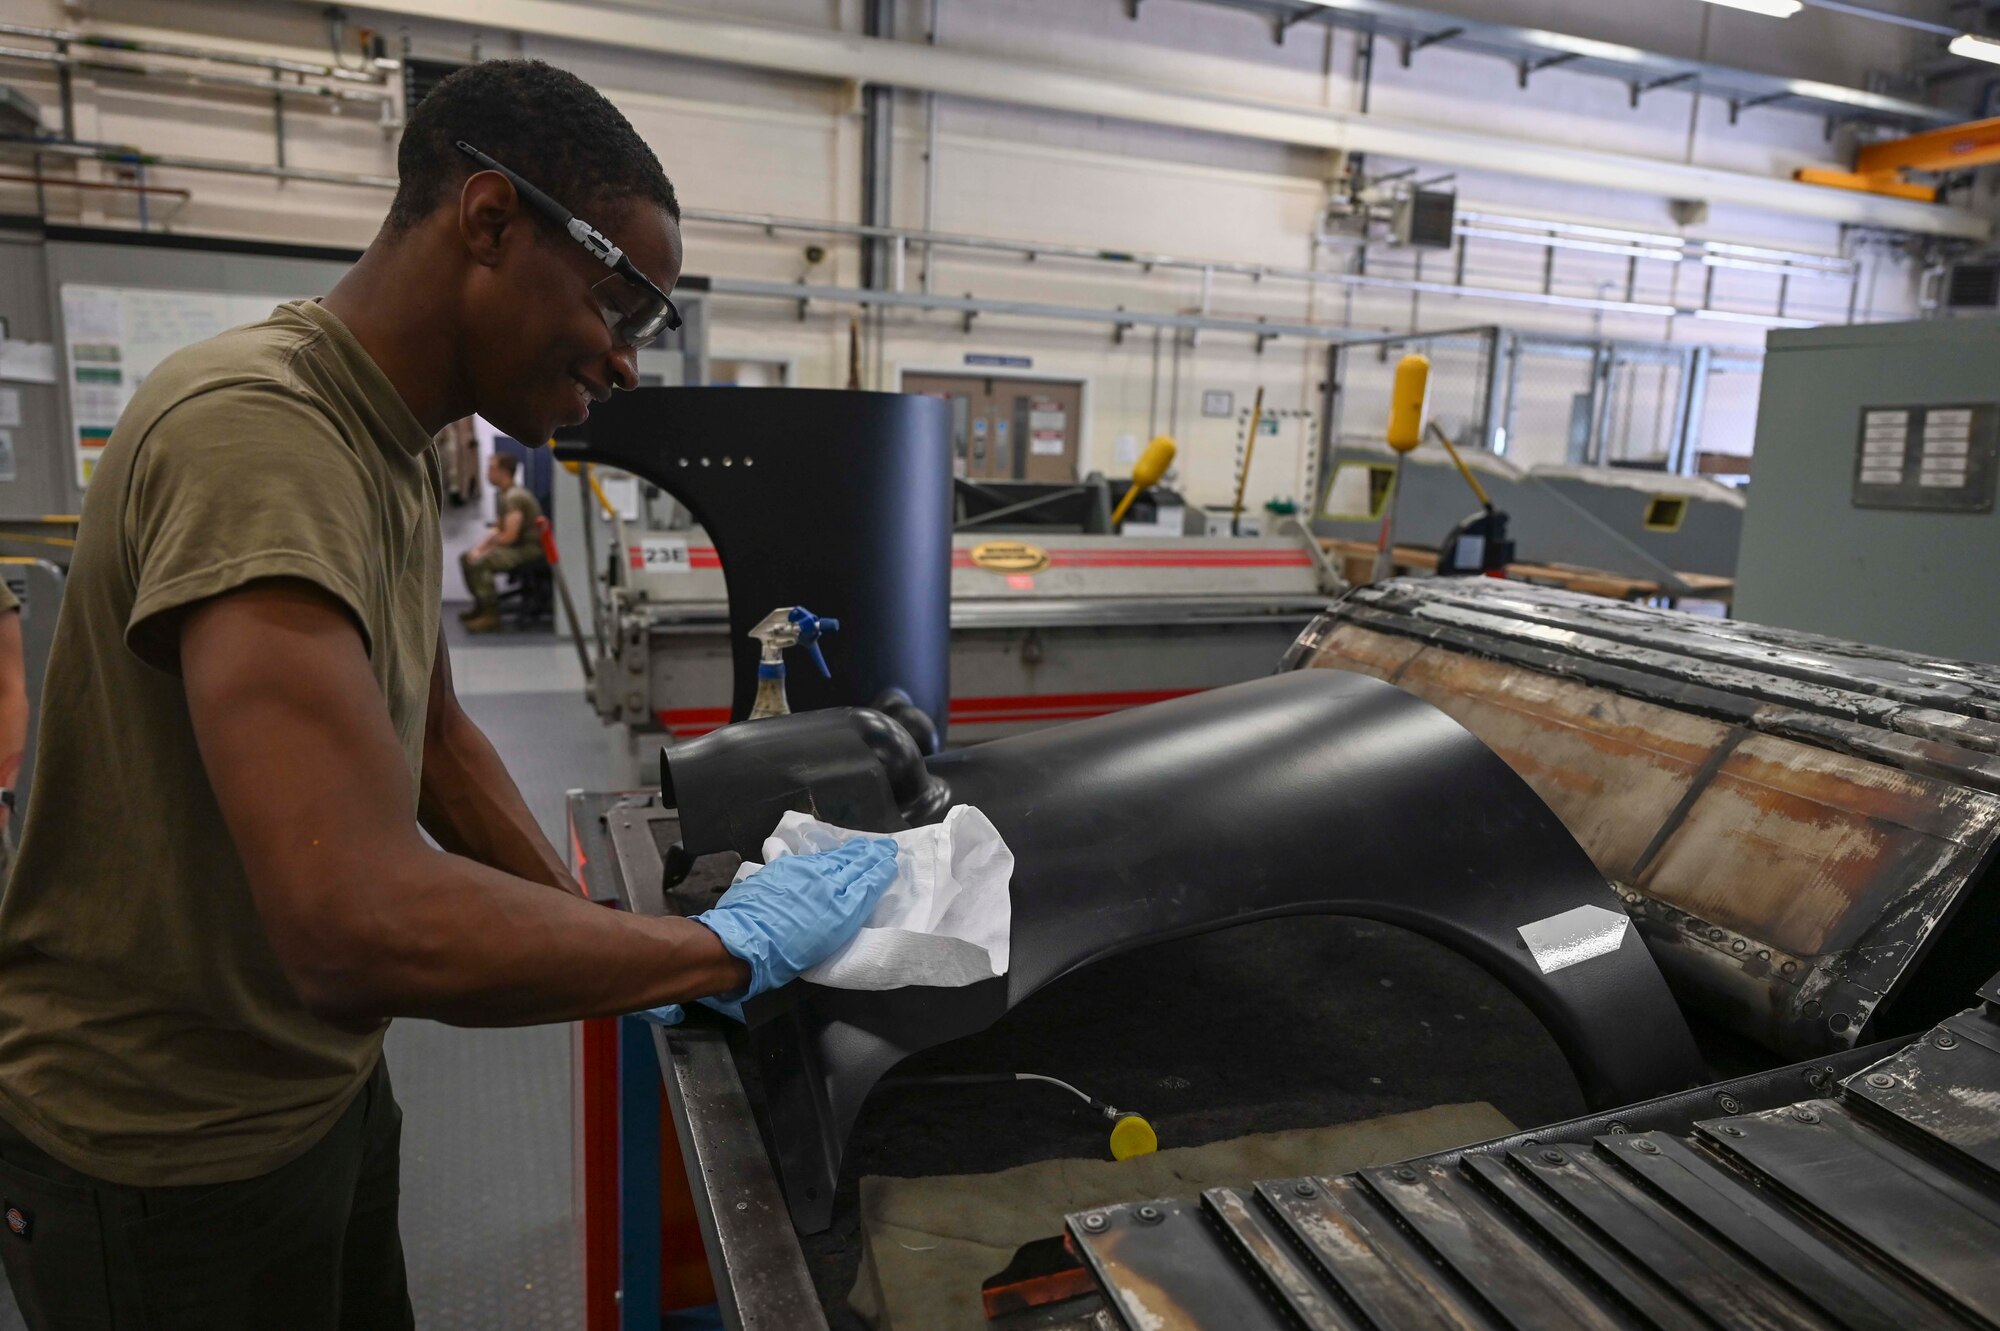 U.S. Air Force Airman 1st Class Carl Jones, 100th Maintenance Squadron sheet metal journeyman, polishes a CV-22 Osprey aircraft body panel at Royal Air Force Mildenhall, England, July 19, 2022. Constant upkeep of the CV-22 prolongs the life of the aircraft, and ensures they are ready to deploy rapidly and respond to critical situations globally. (U.S. Air Force photo by Airman 1st Class Viviam Chiu)